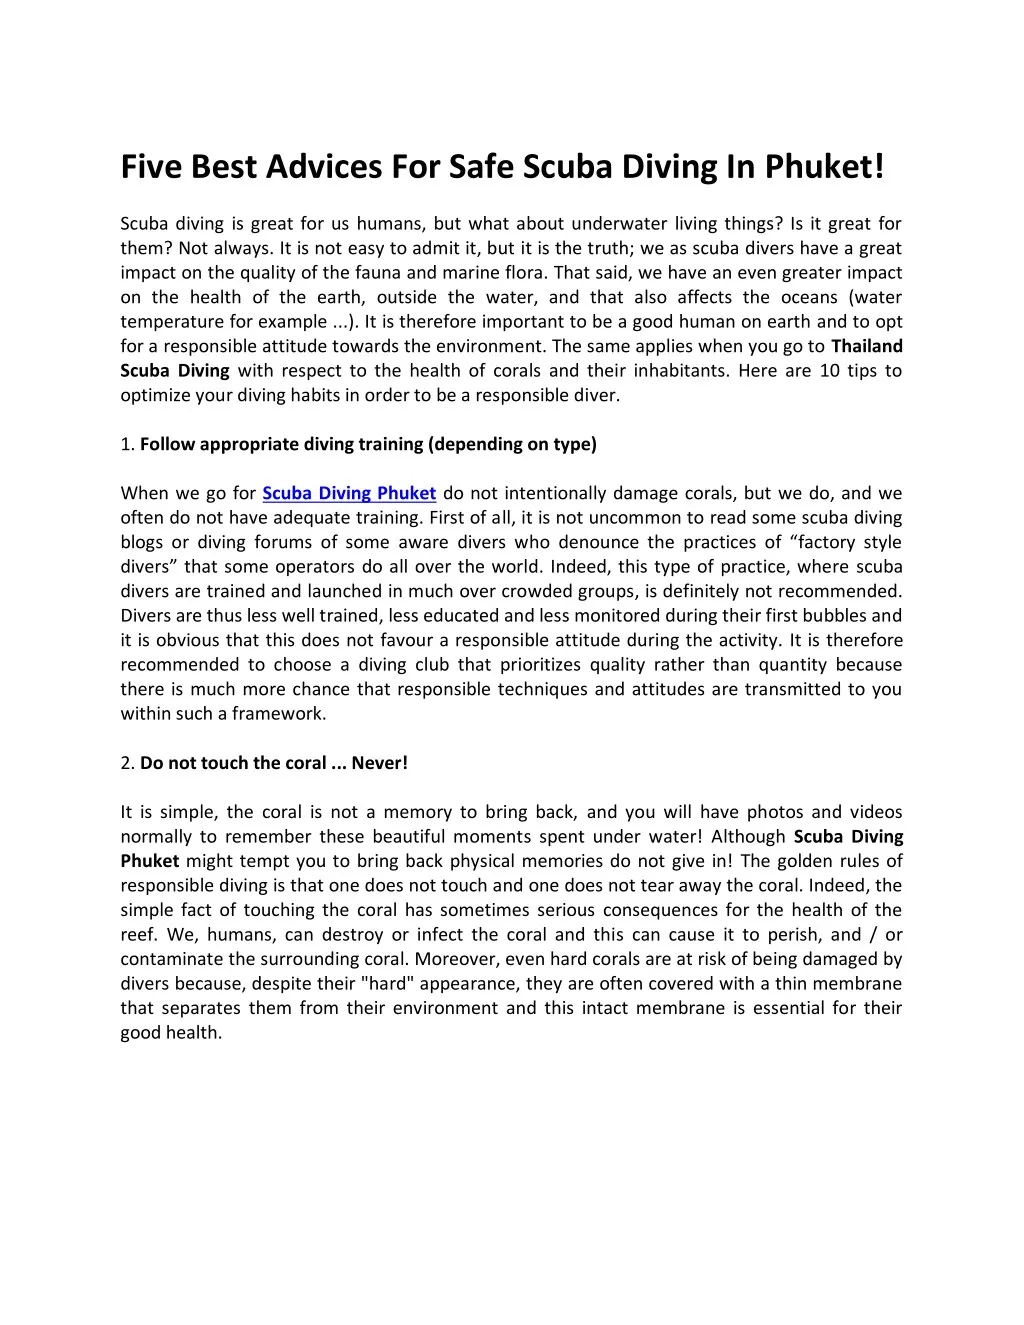 five best advices for safe scuba diving in phuket